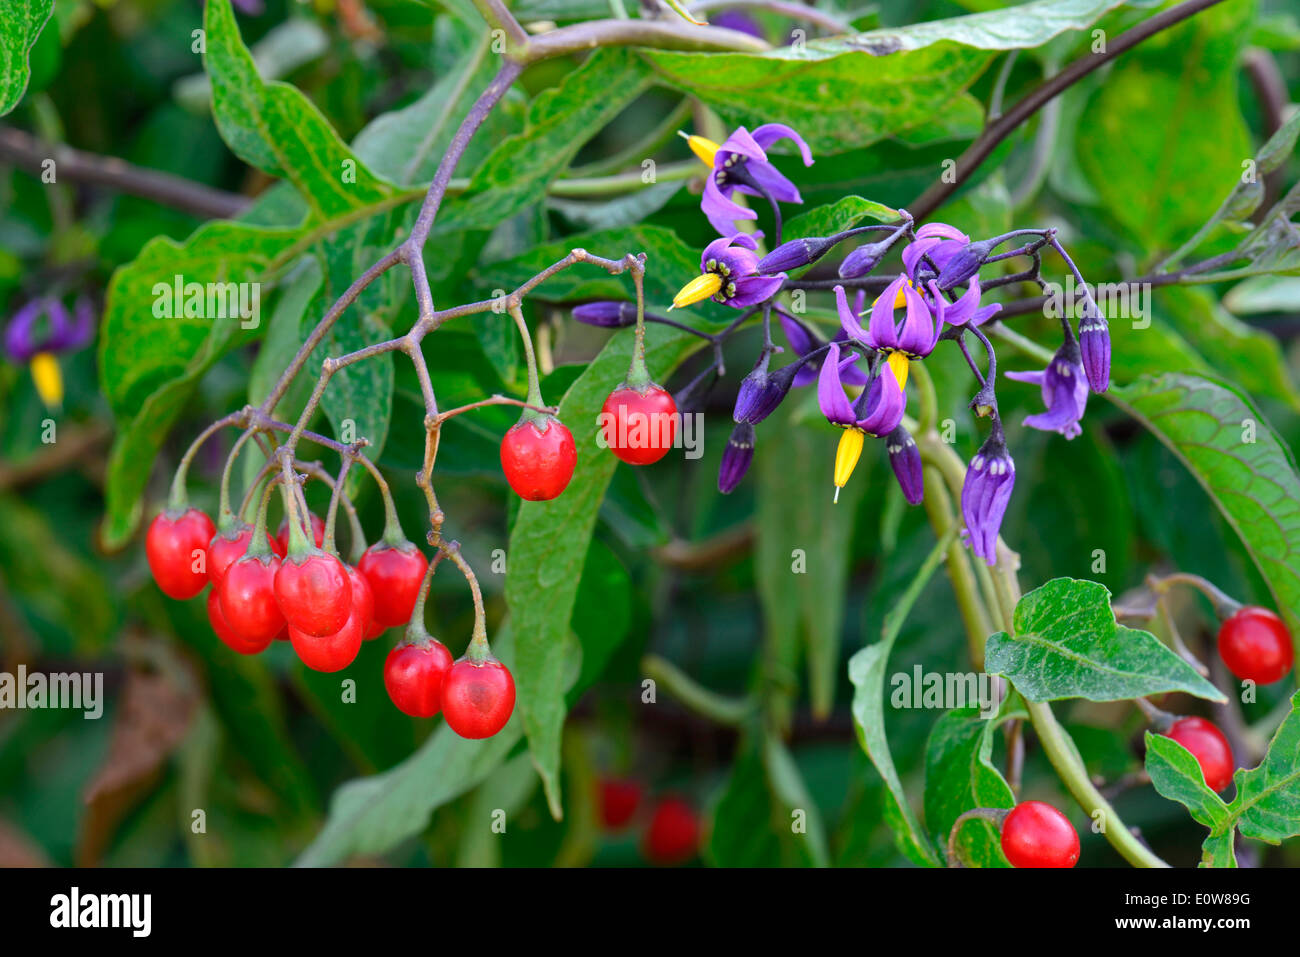 Bittersweet Nightshade, Deadly Nightshade (Solanum dulcamara), plant with ripe berries and flowers. Germany Stock Photo